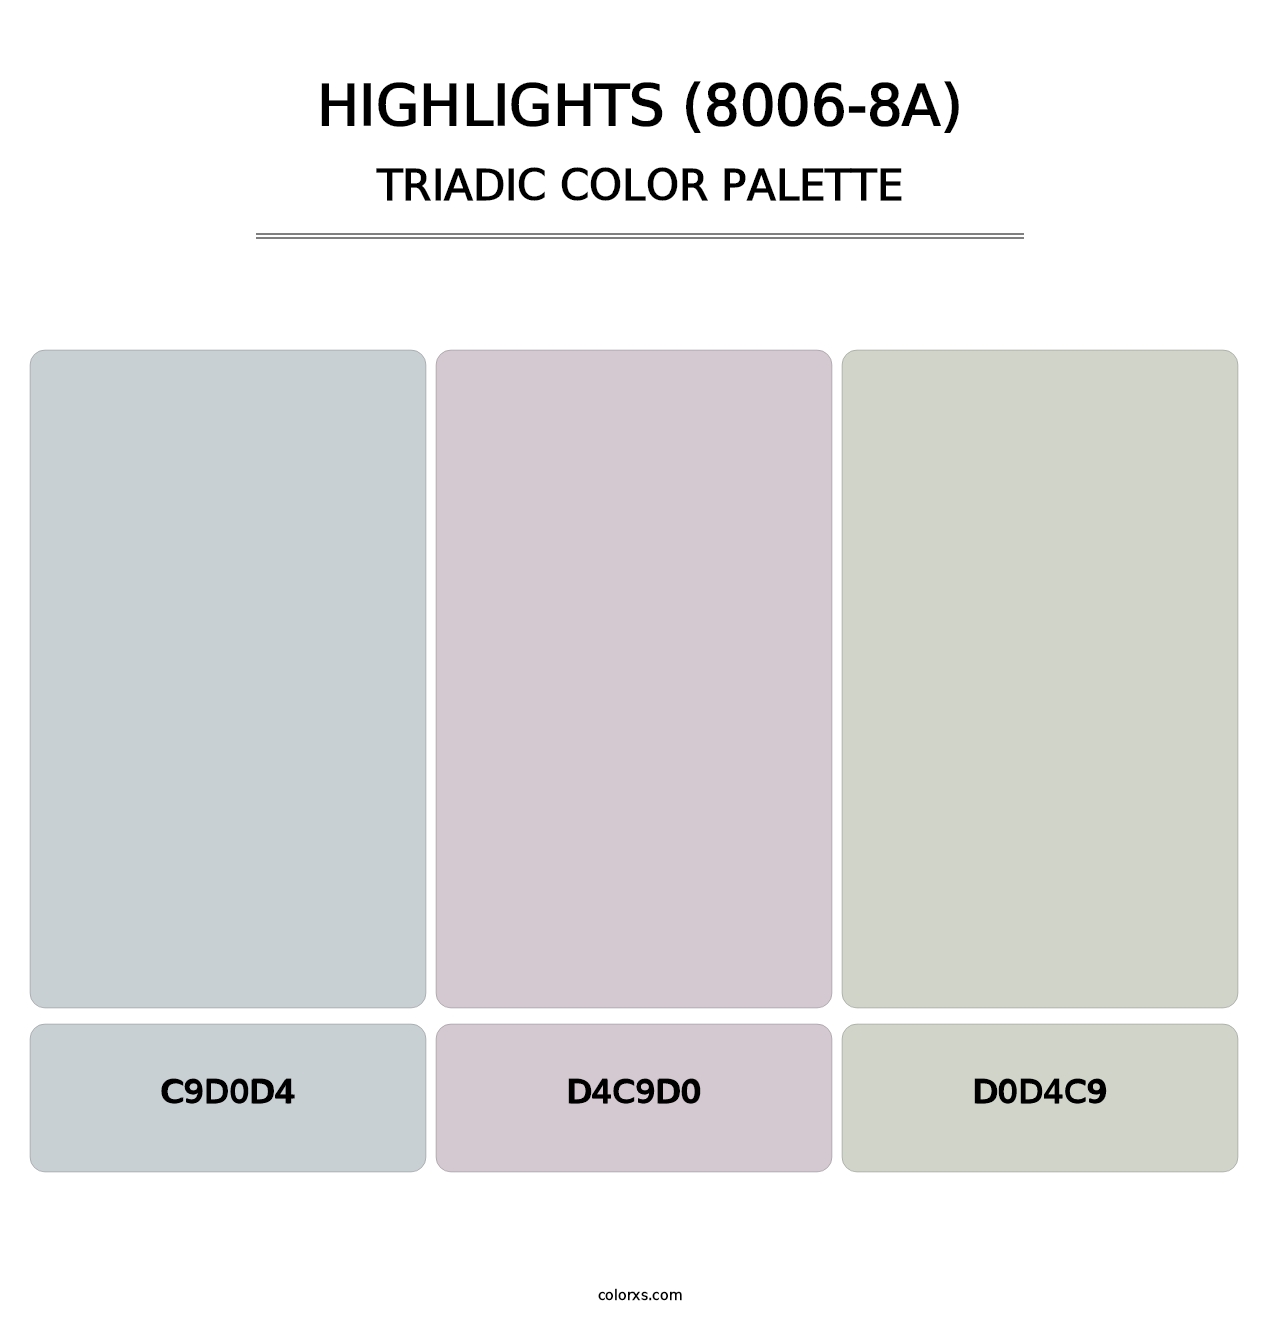 Highlights (8006-8A) - Triadic Color Palette